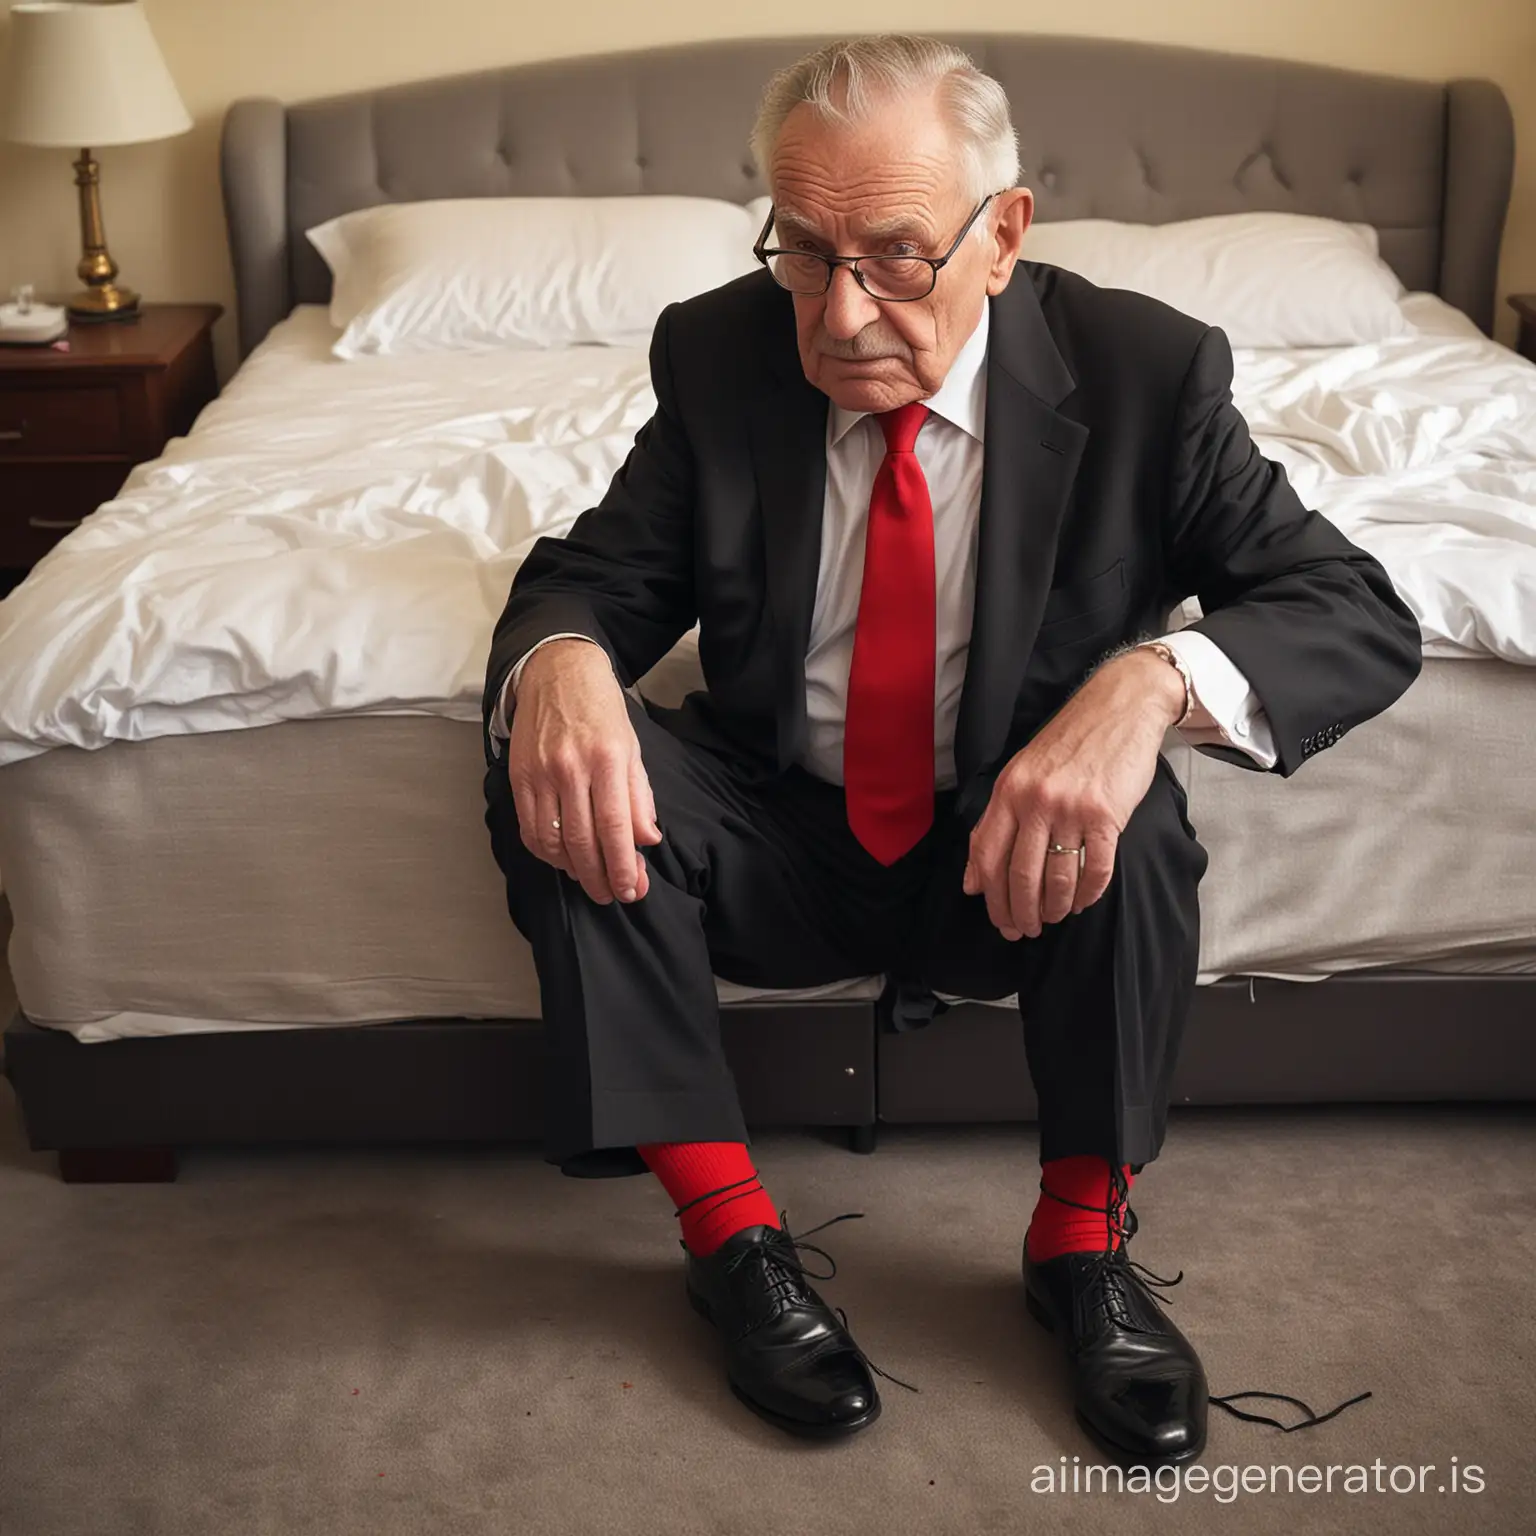 An elderly man, shot height, wearing black suit, red socks, black shoes, being tied up to a bed, looking helpless.